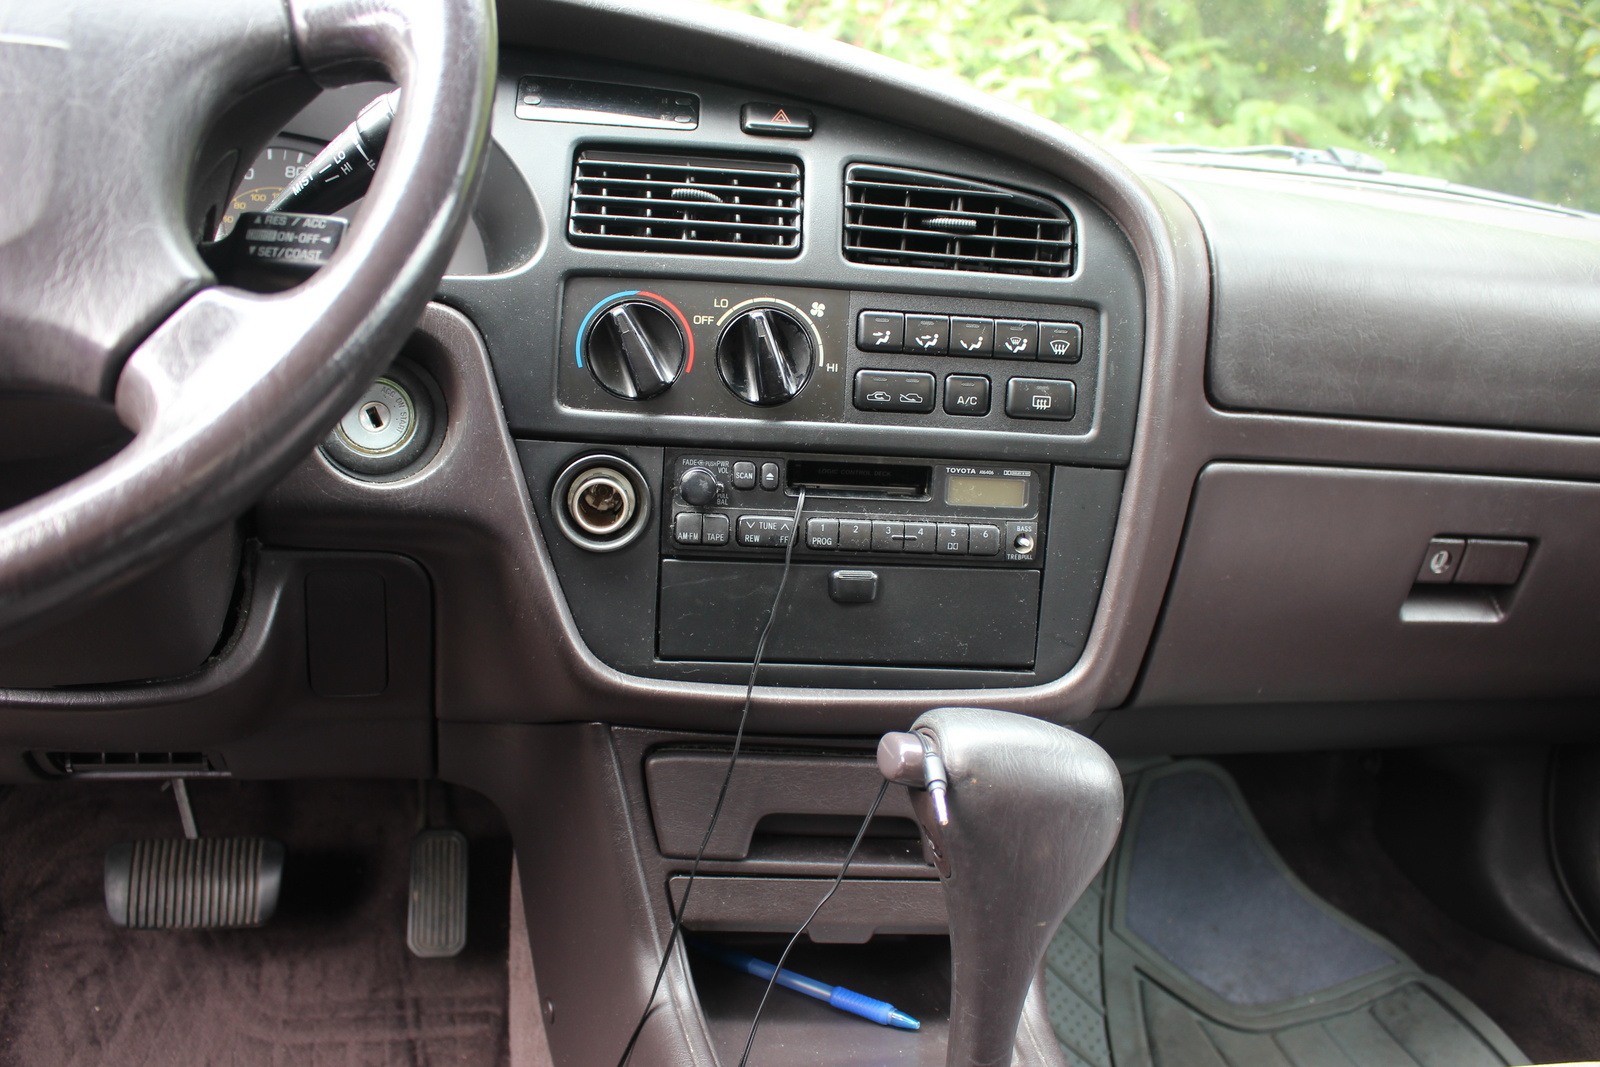 1995 toyota camry interior pictures #4